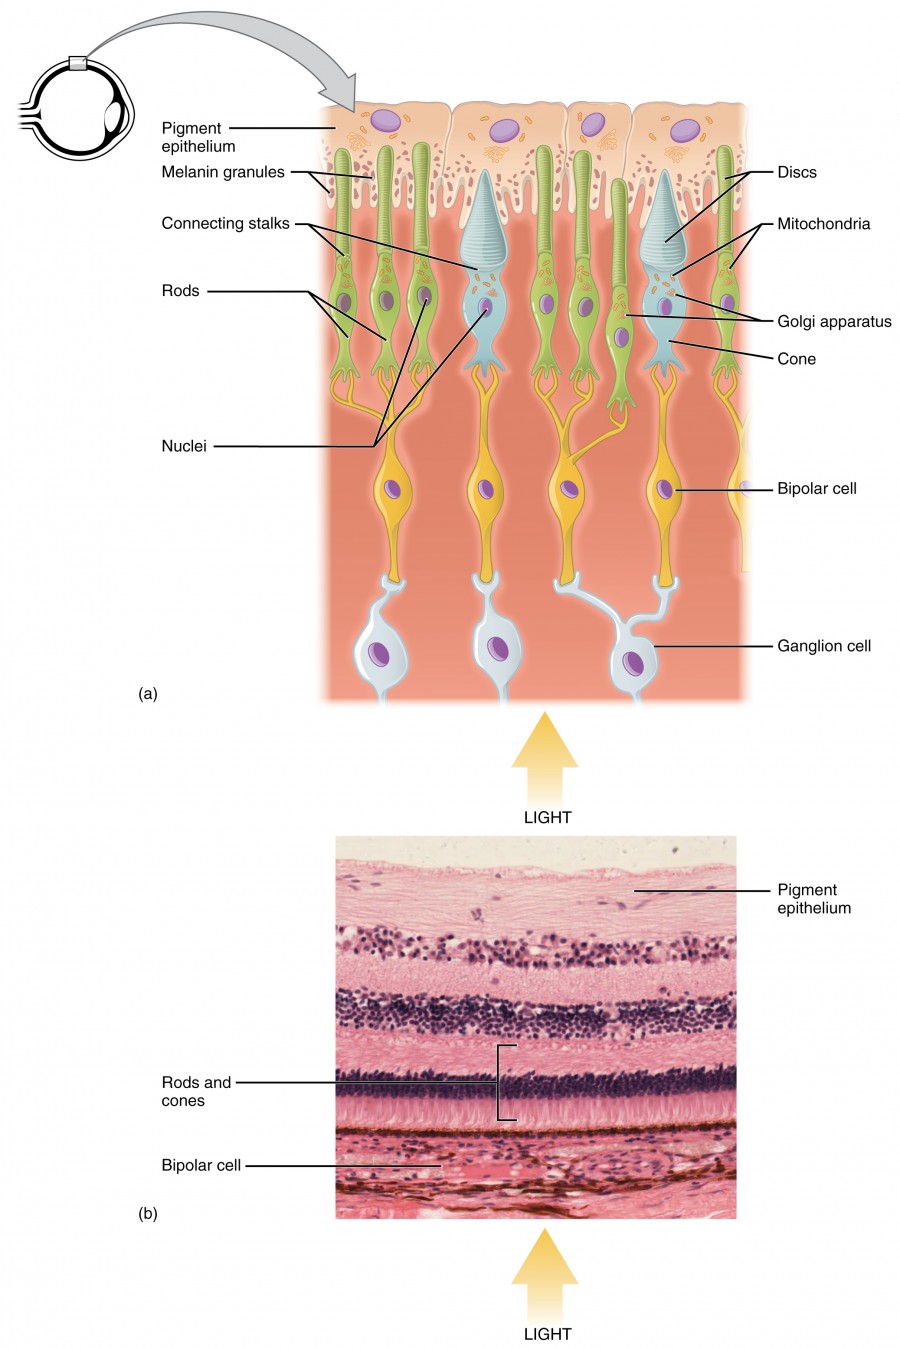 The top panel shows the cellular structure of the different cells in the eye. The bottom panel shows a micrograph of the cellular structure.